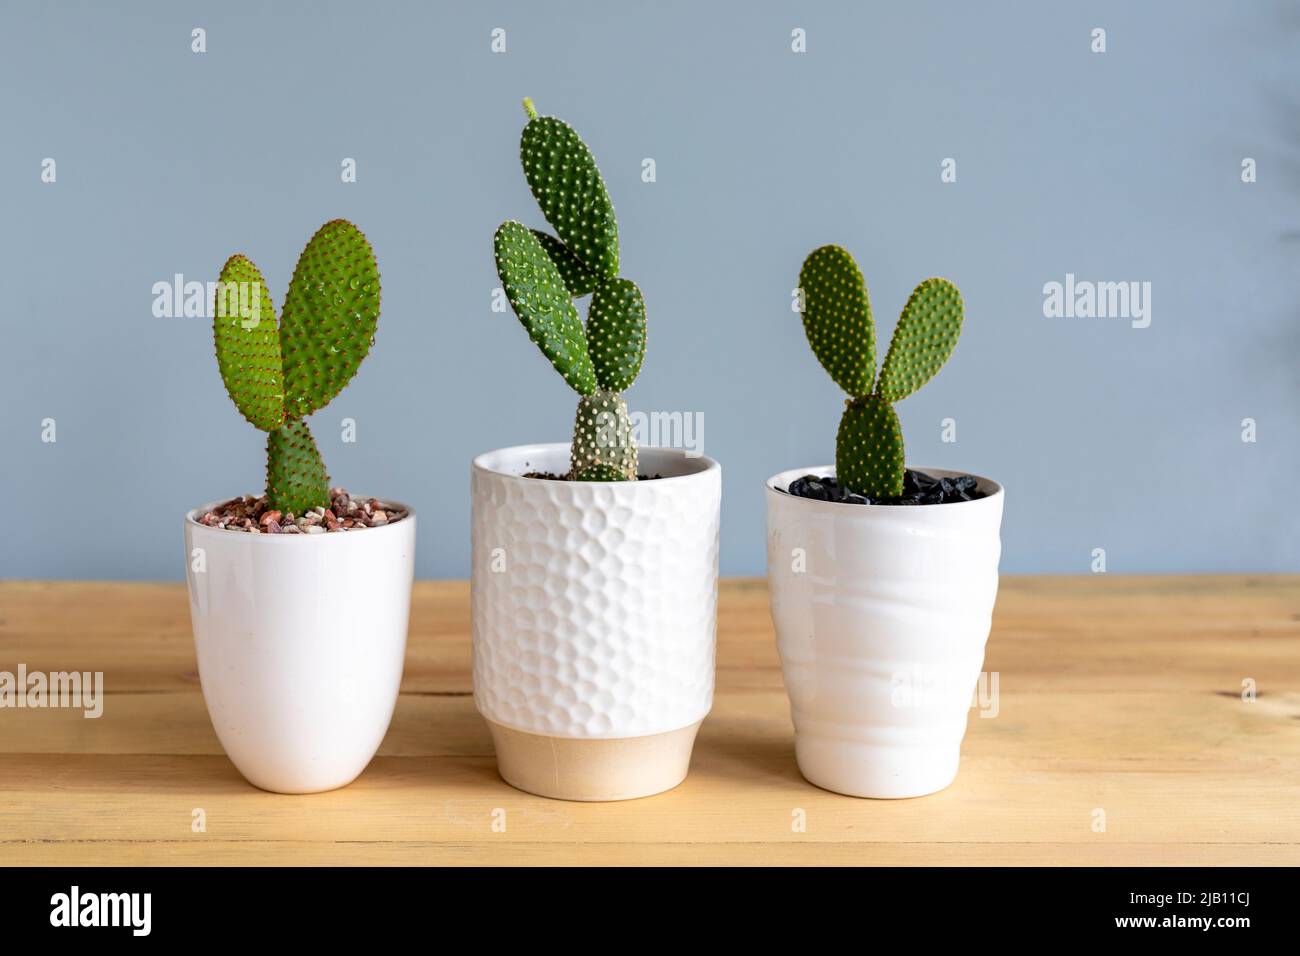 Bunny ears cactus yellow, white and red plants in decorative pots Stock Photo